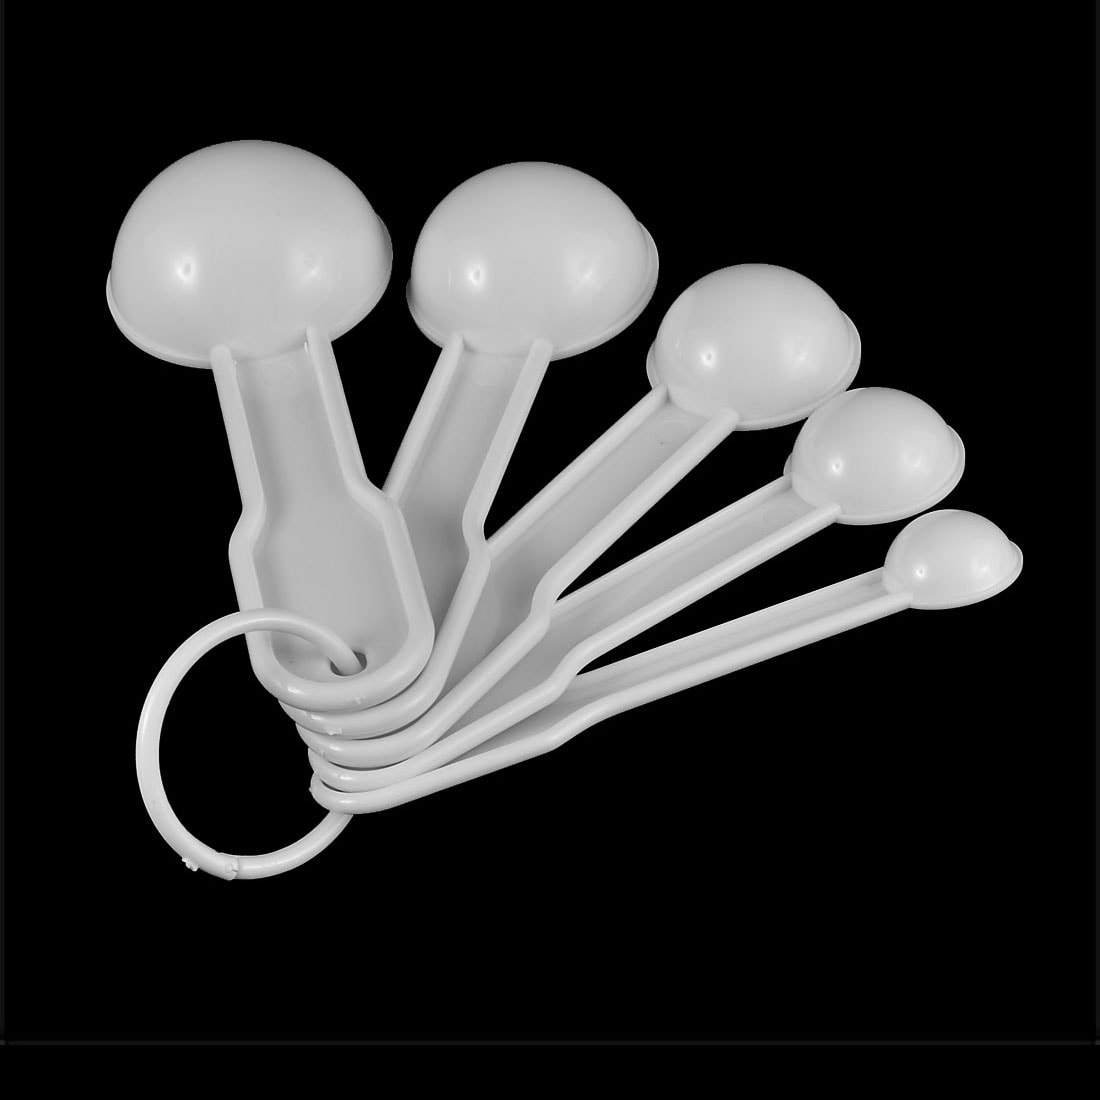 https://ak1.ostkcdn.com/images/products/is/images/direct/a968150c7946cf0b07568e4ad97ce3f61193e46f/Restaurant-Family-Kitchenware-Plastic-Salt-Sugar-Measuring-Spoons-Set-White.jpg